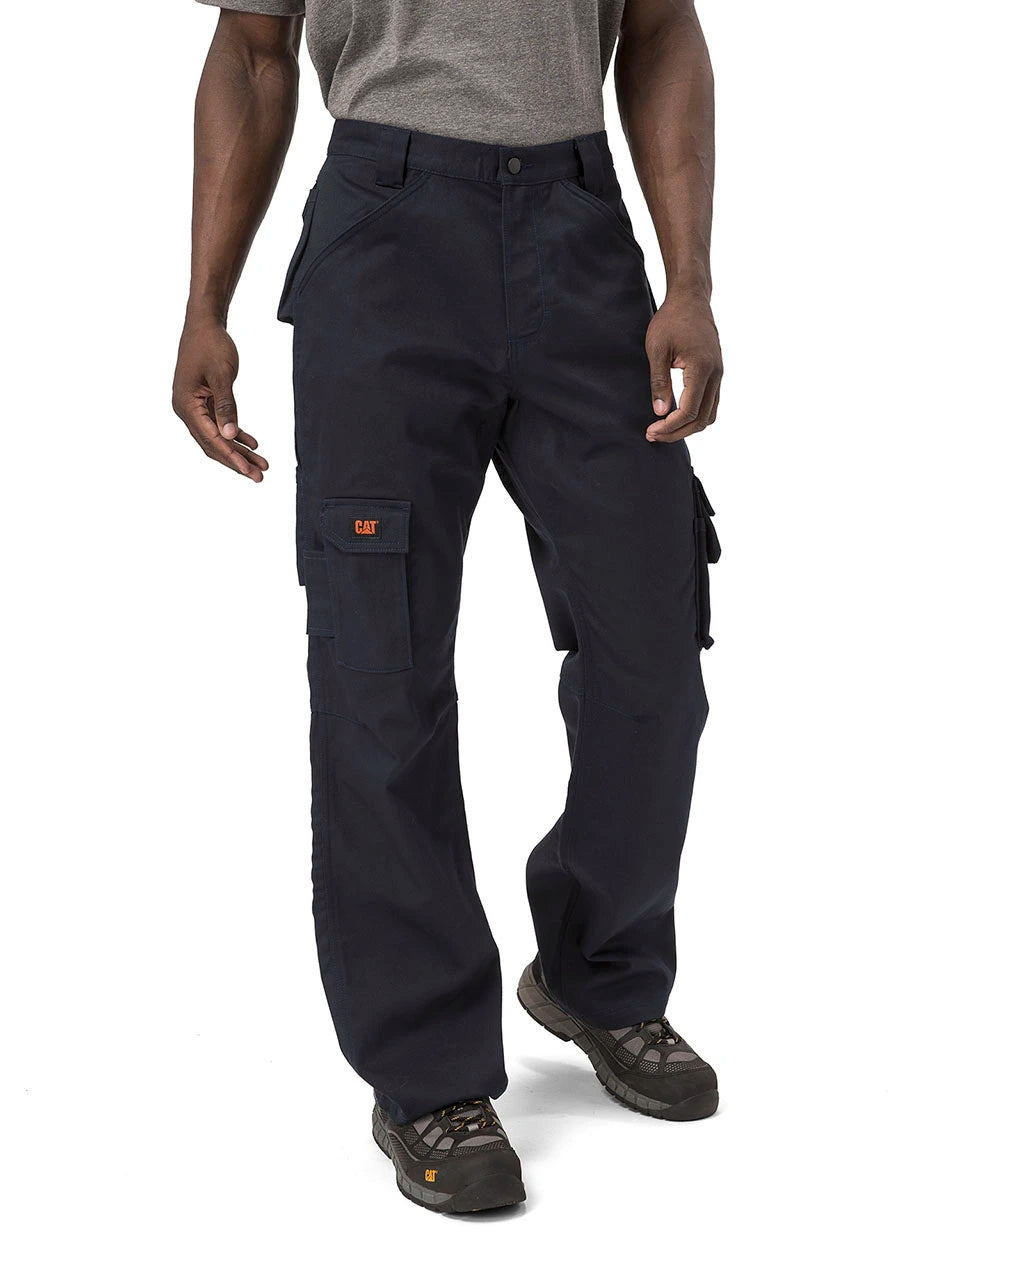 UA Flex Pant Size Guide And Review 